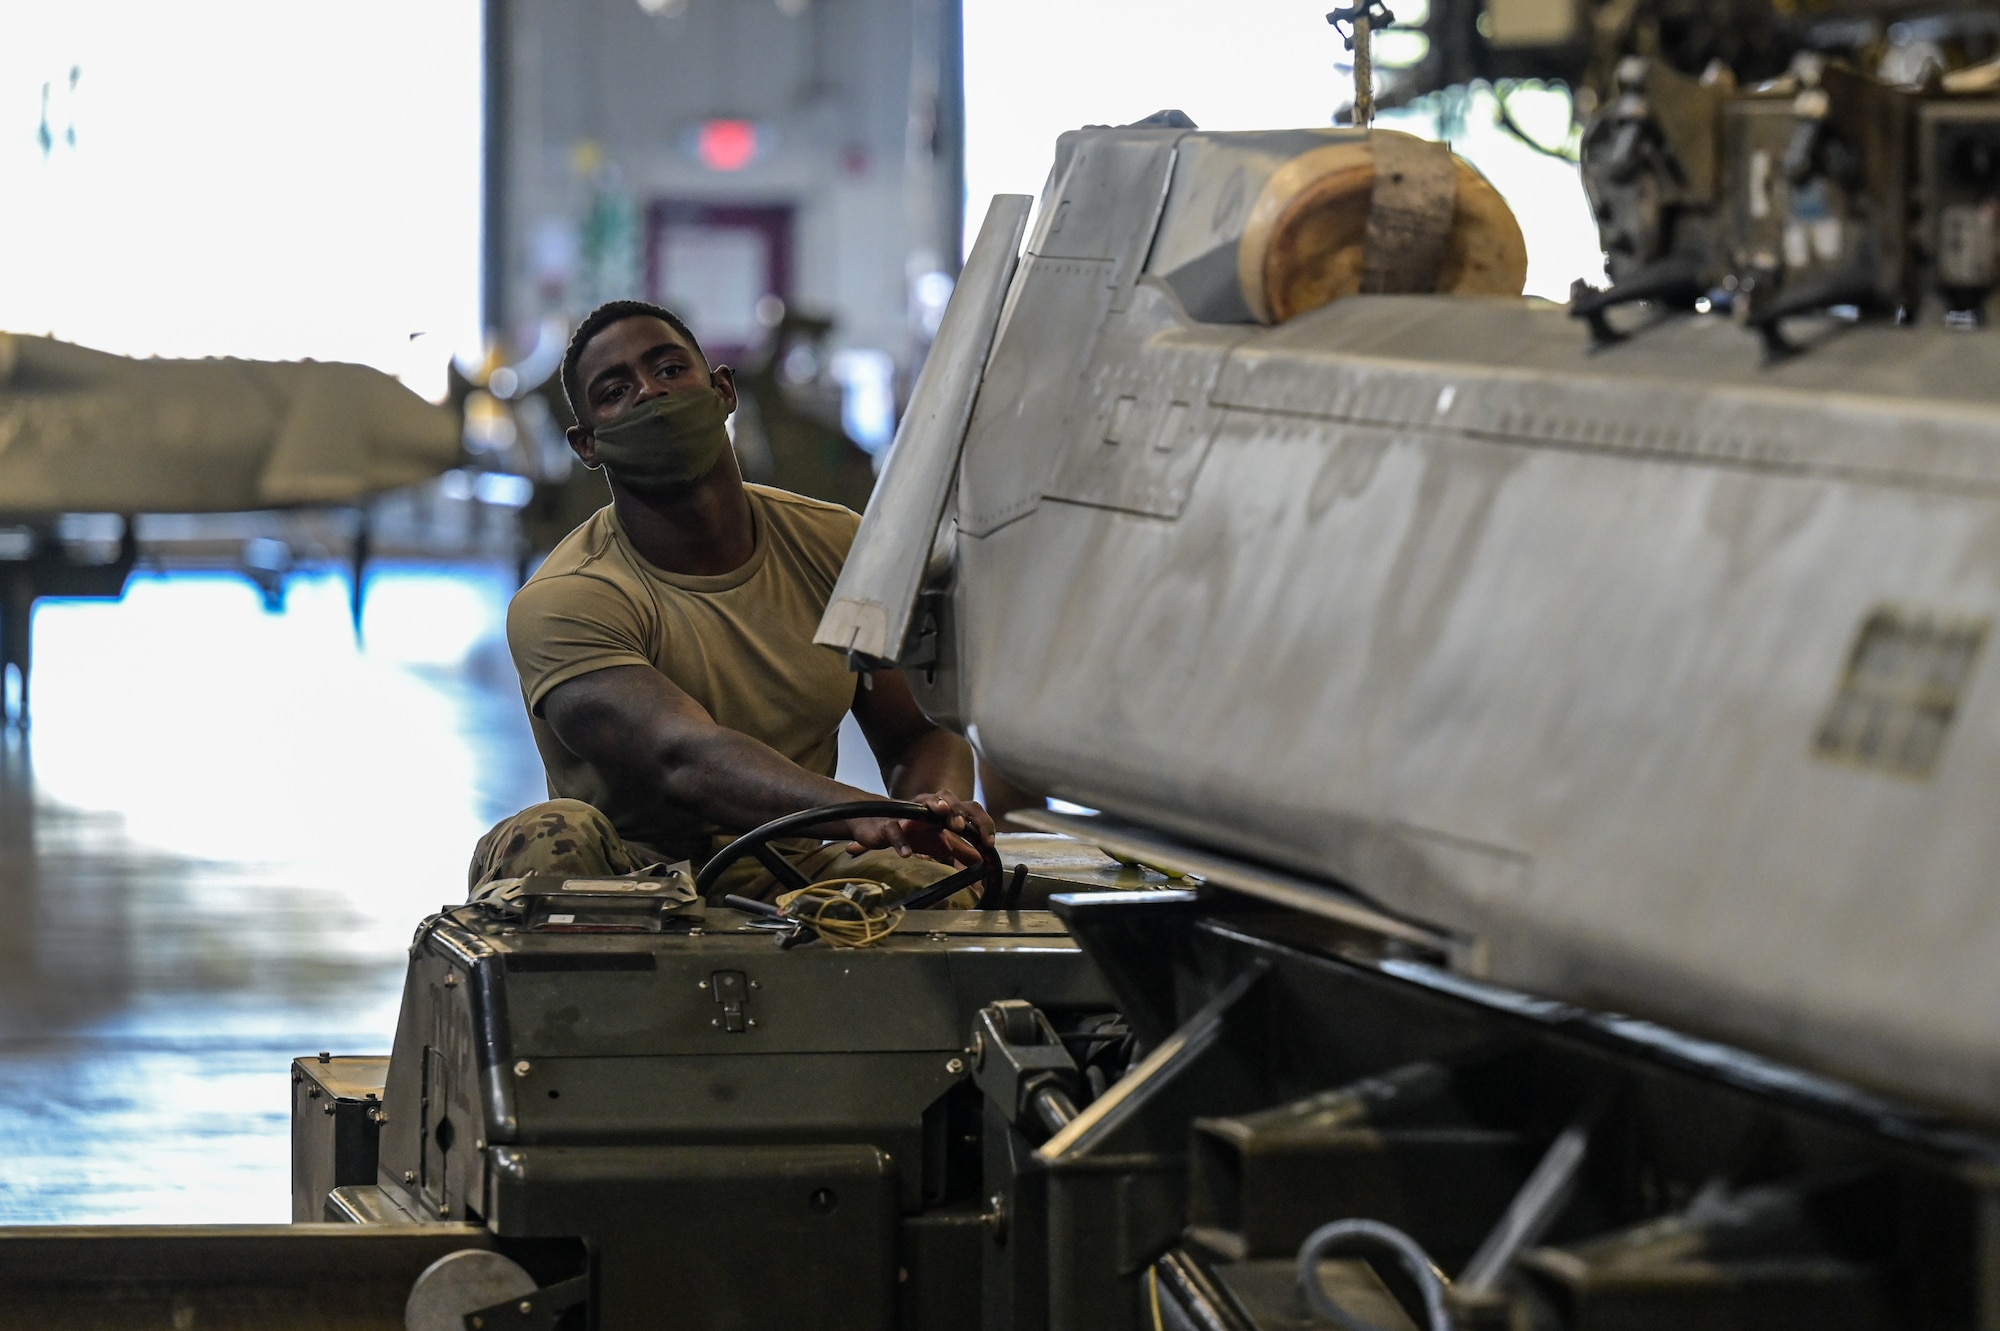 Senior Airman Sterling Brooks, 2nd Munitions Squadron weapons maintenance team member, moves an Air-launched Cruise Missile at Barksdale Air Force Base, Louisiana, Oct. 20, 2021. The ALCM was developed to increase the effectiveness and survivability of the B-52H Stratofortress strategic bomber. (U.S. Air Force photo by Airman 1st Class Jonathan E. Ramos)